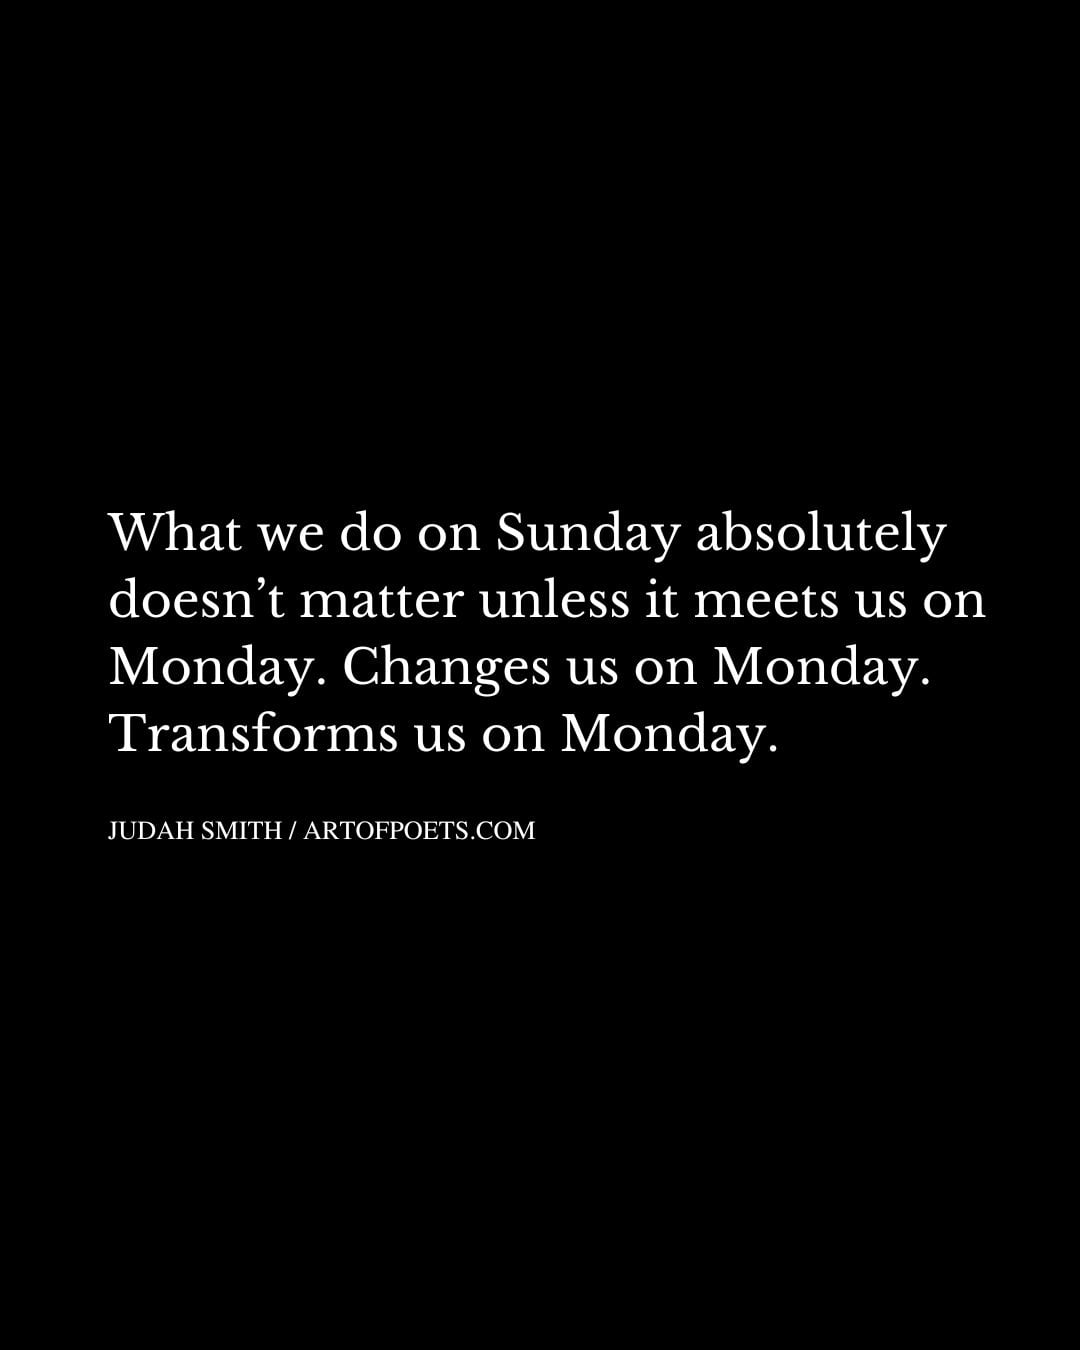 What we do on Sunday absolutely doesnt matter unless it meets us on Monday. Changes us on Monday. Transforms us on Monday